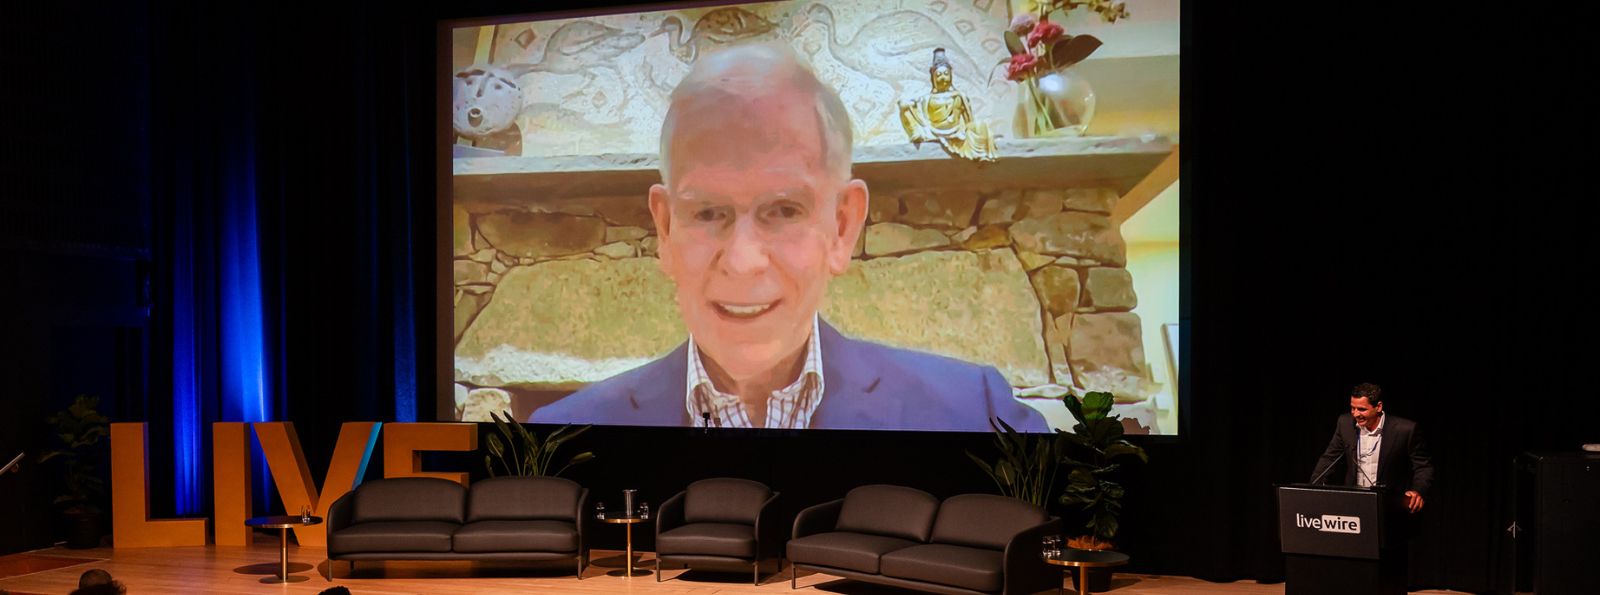 Livewire's James Marlay interviewing Jeremy Grantham via Zoom. (Source: Eden Connell)